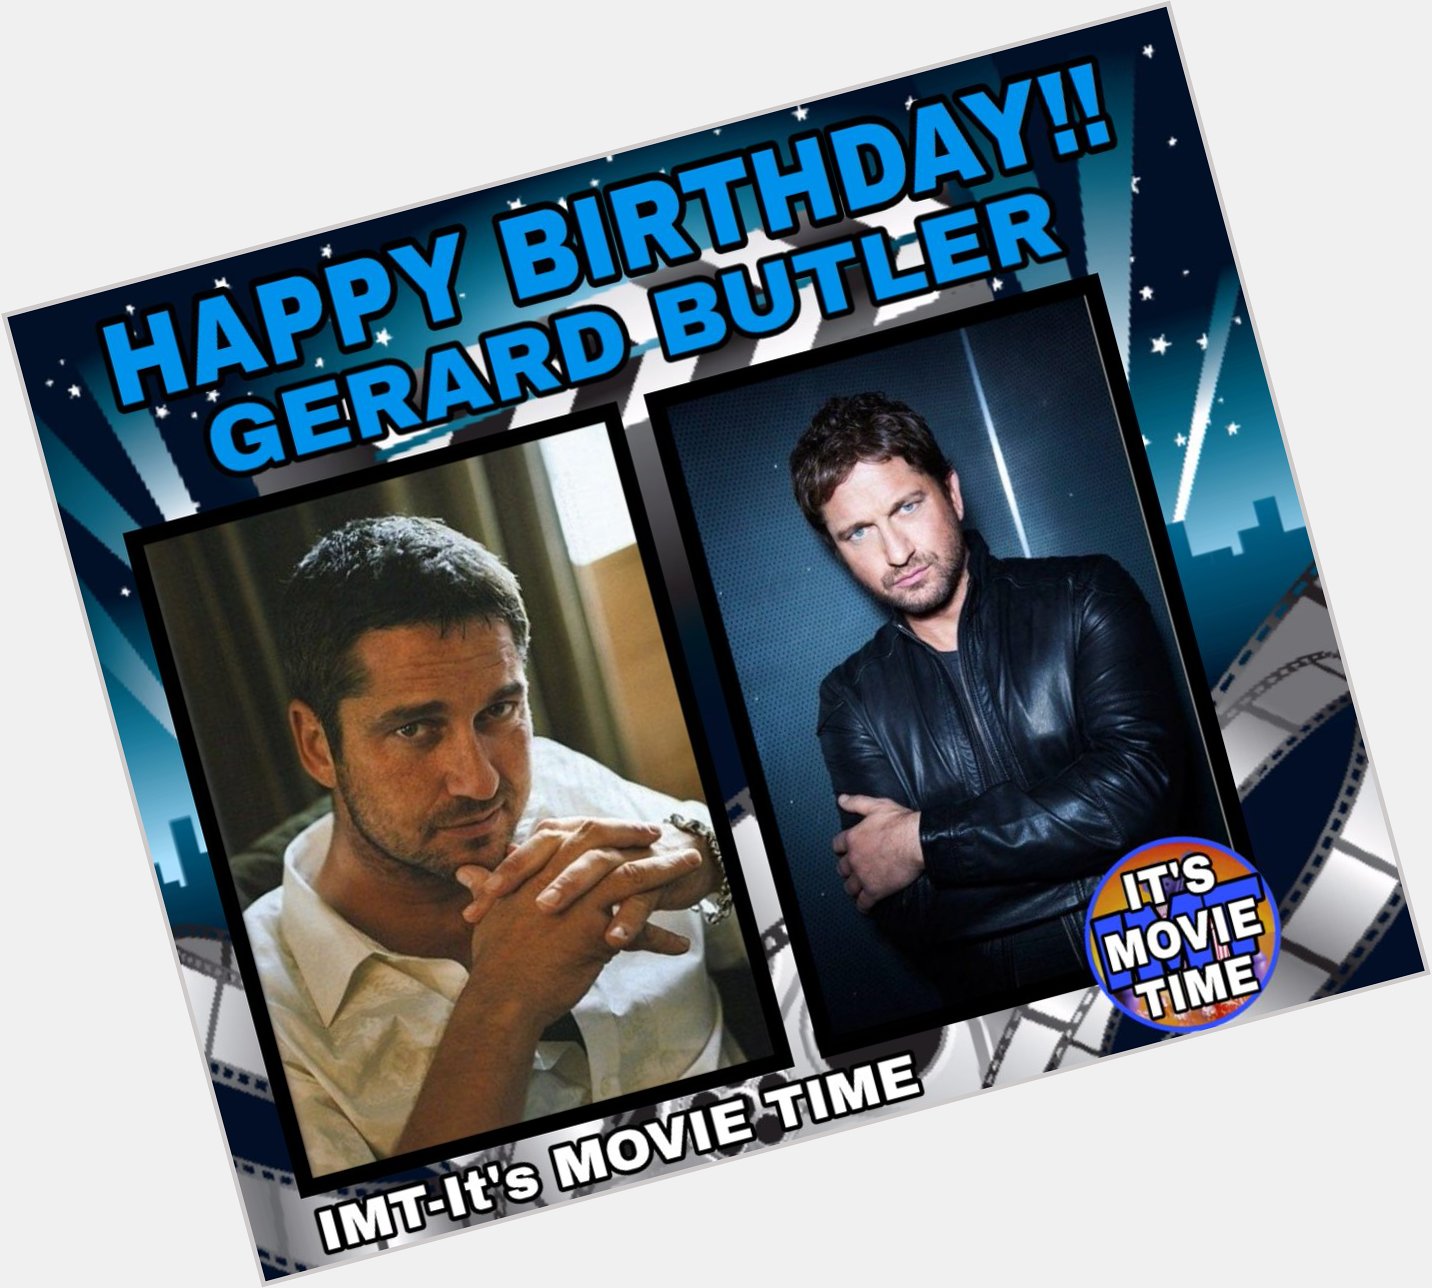 Happy Birthday to Gerard Butler! The actor is celebrating 50 years 